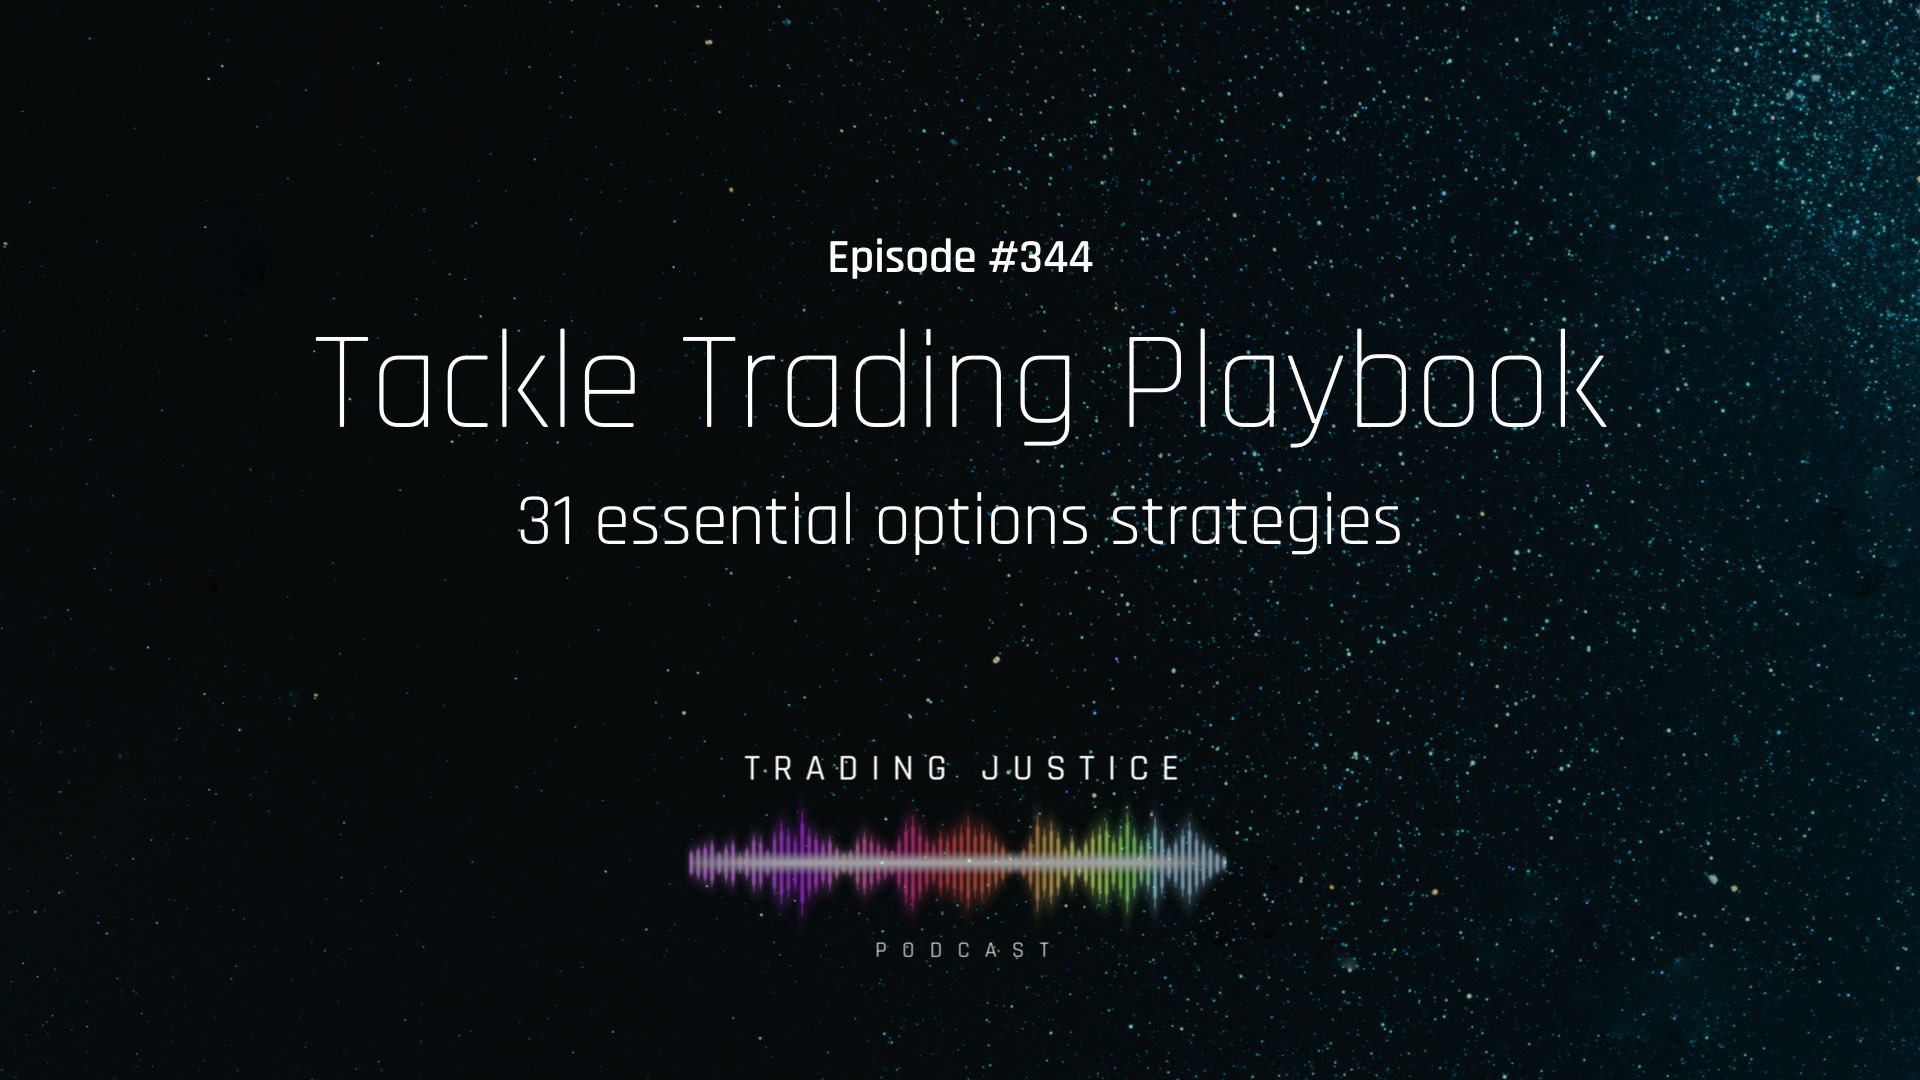 Trading Justice Episode 344 - Tackle Trading Playbook: 31 essential options strategies